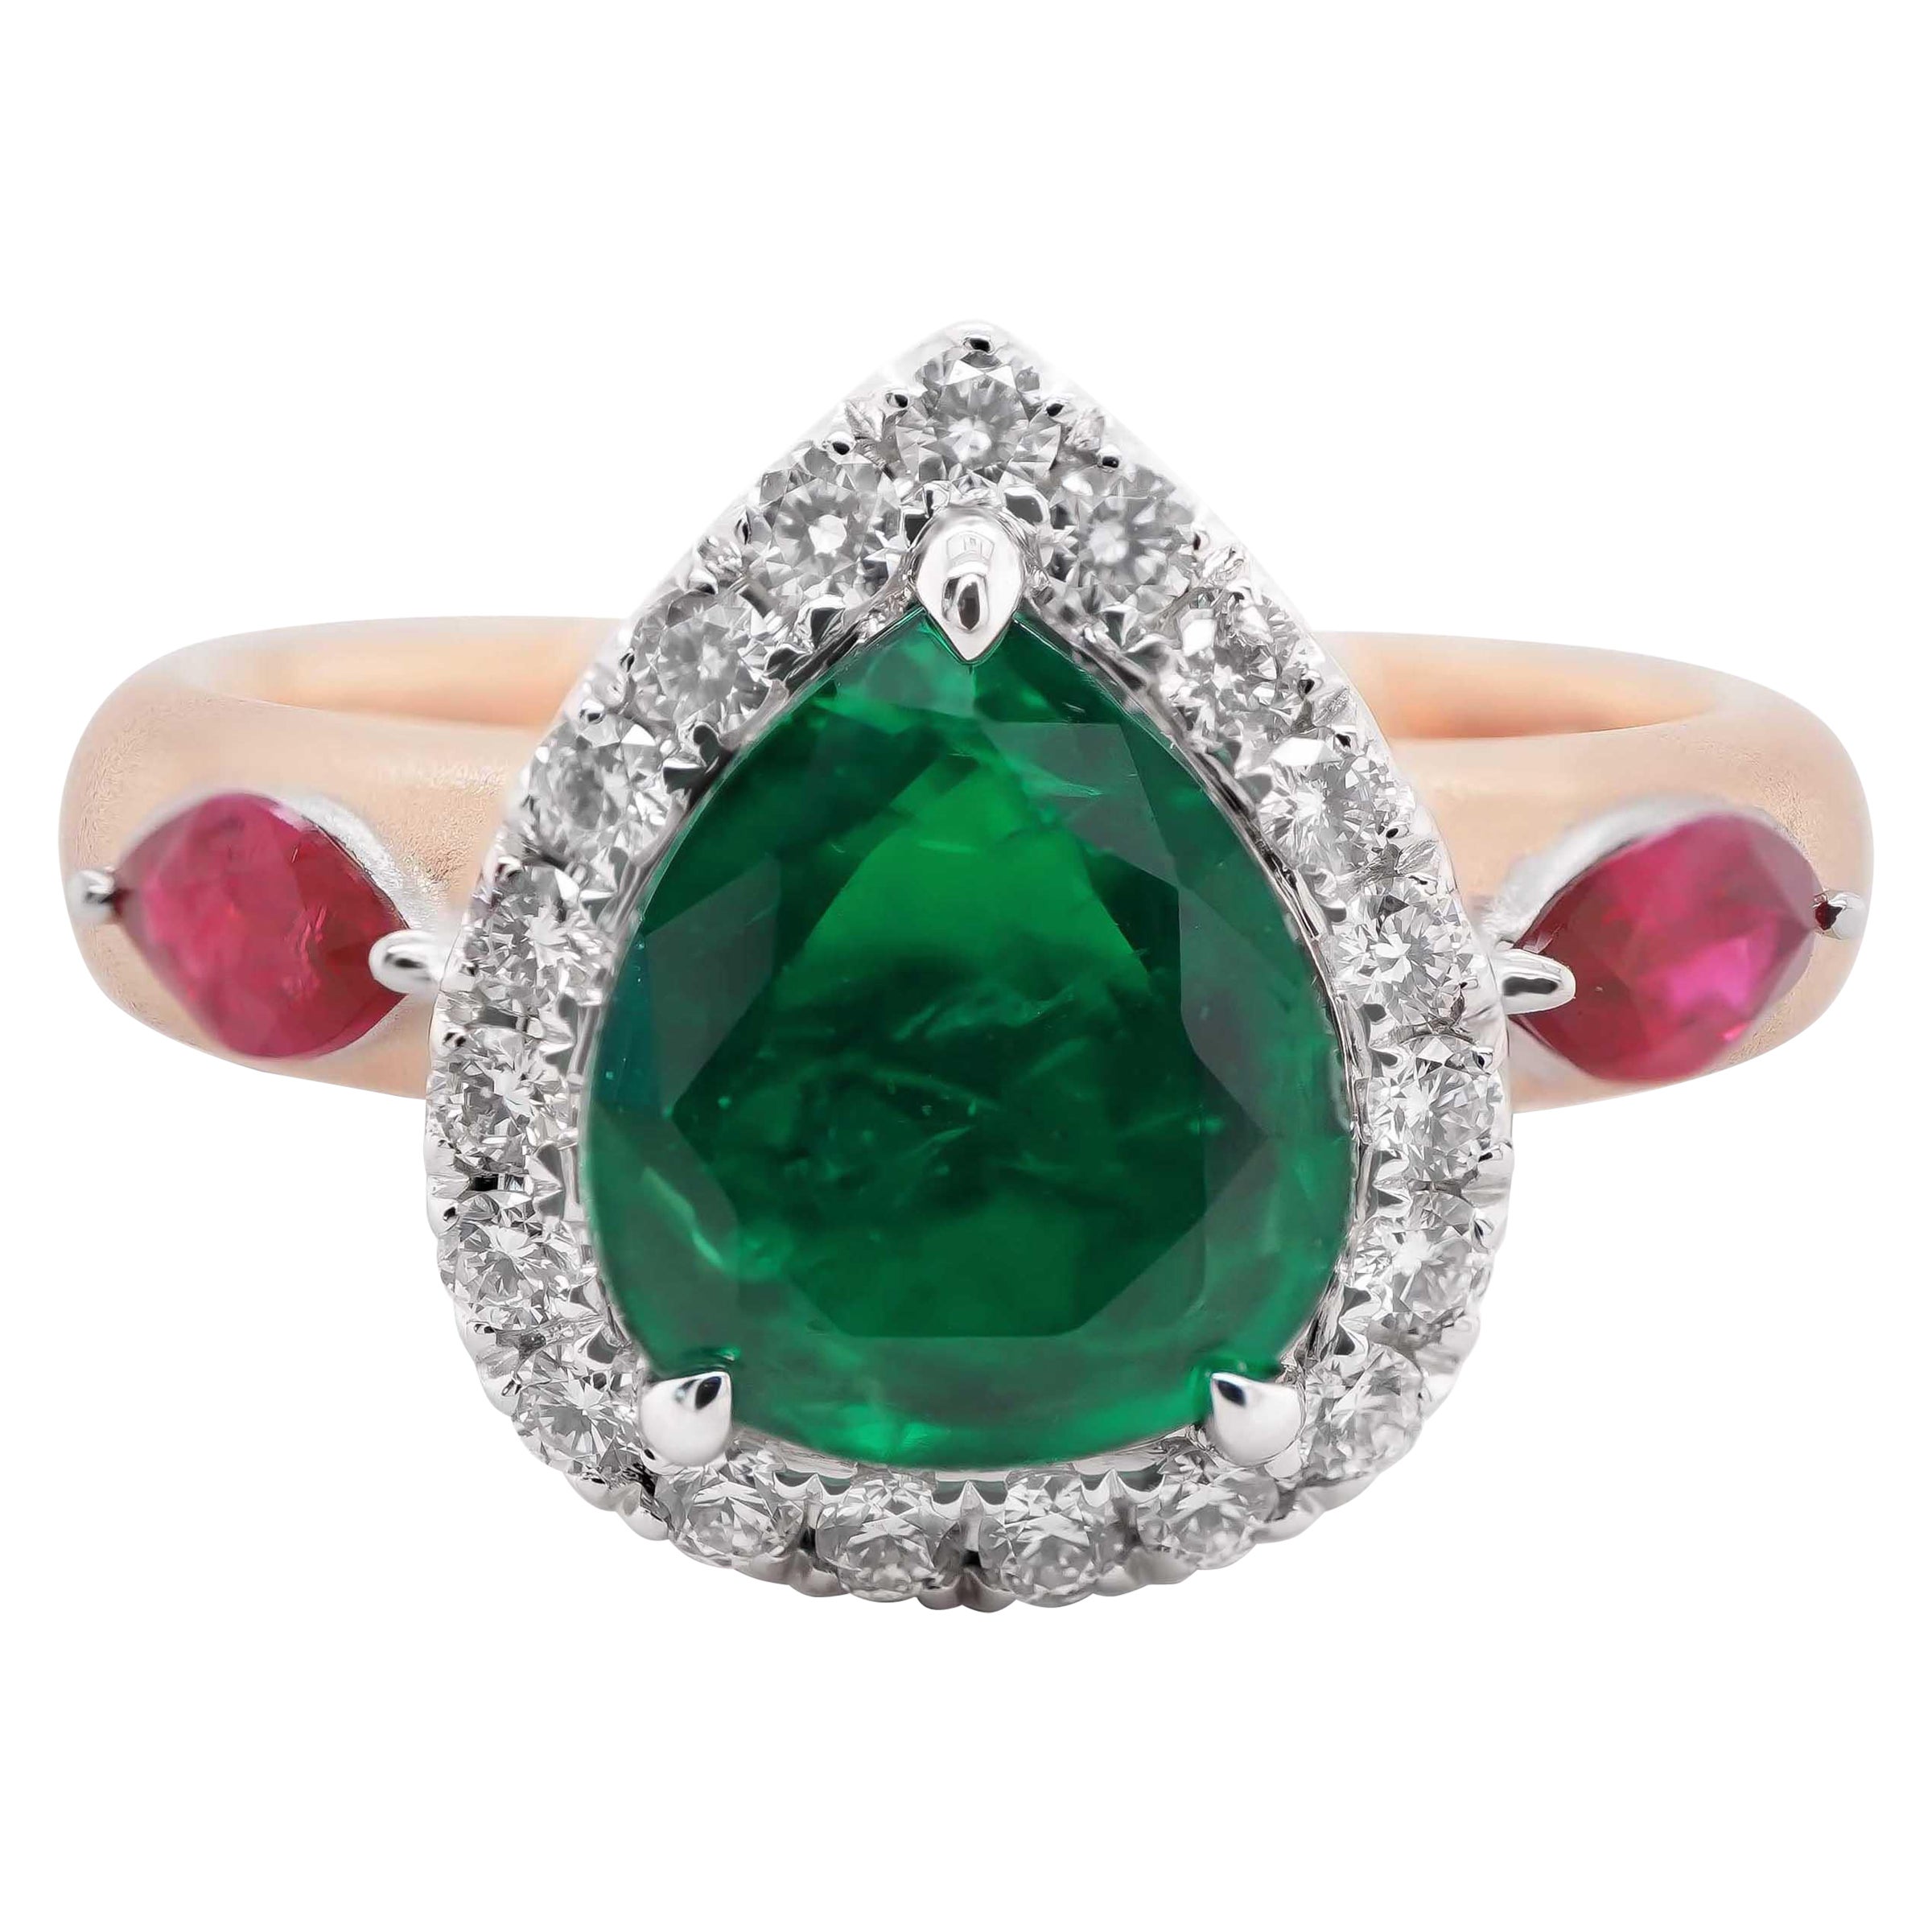 1.05 Carat Vivid Green Emerald Flanked by Ruby Marquise Matt Finish 18K Gold For Sale